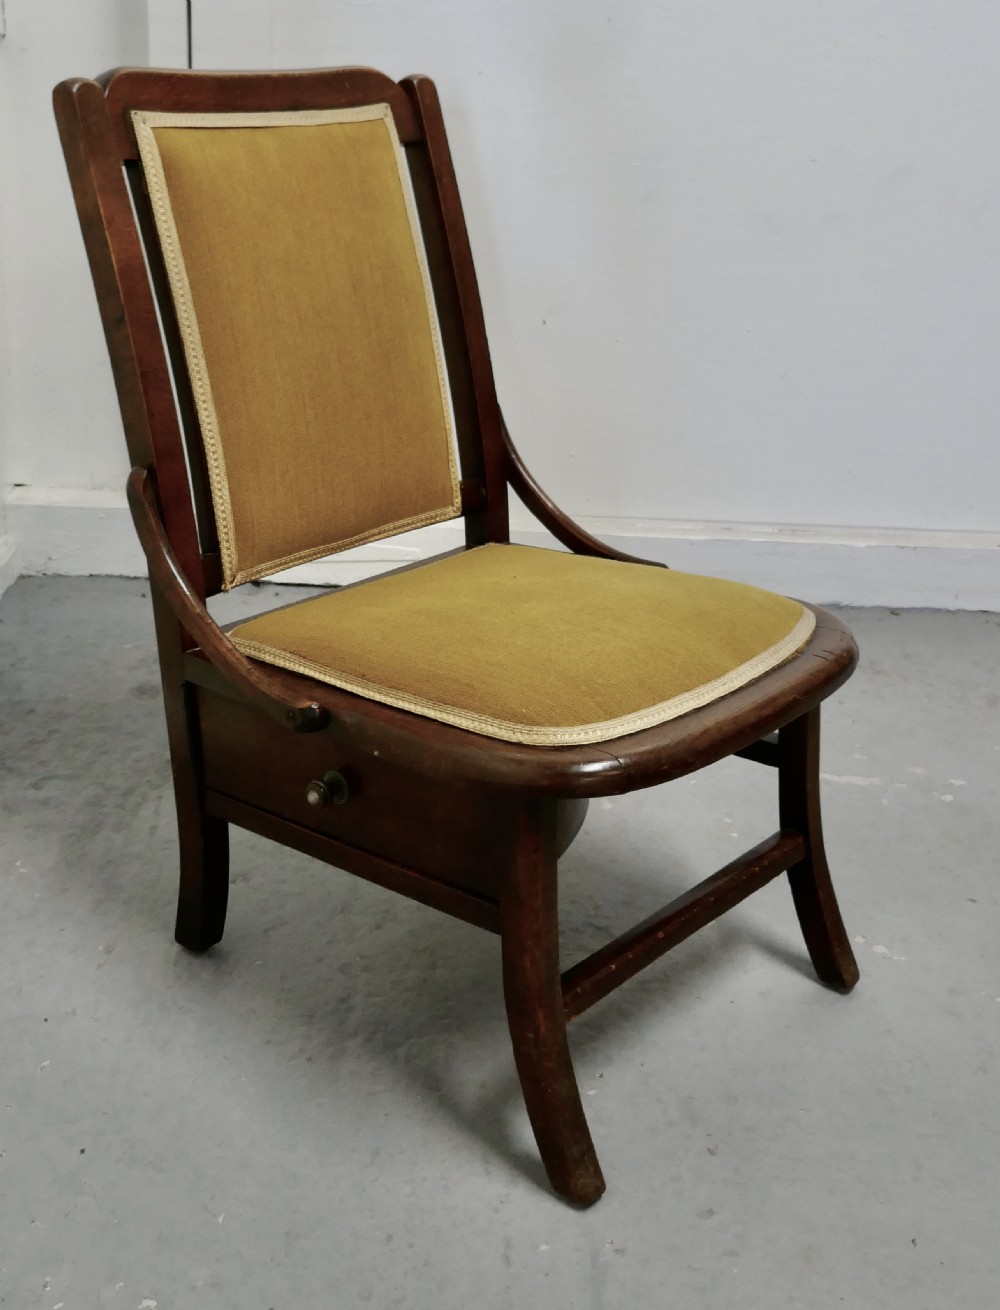 charming little chair with knitting wool drawer